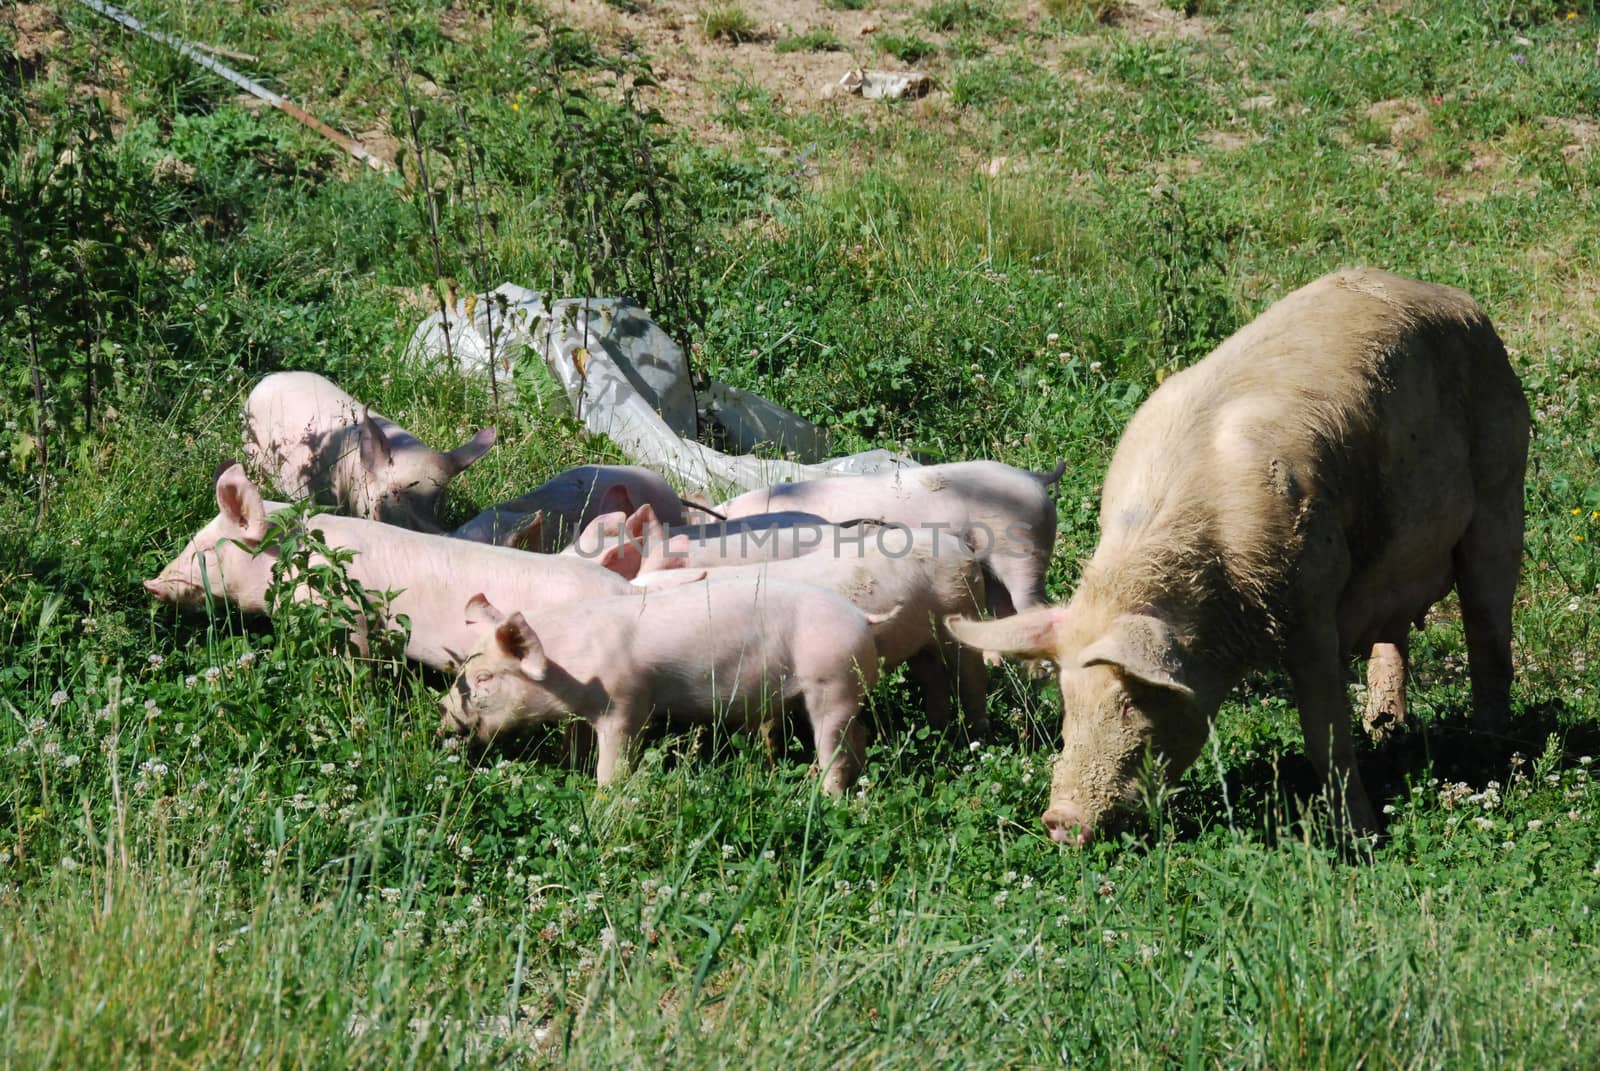 Some piglets run in a meadow by cosca